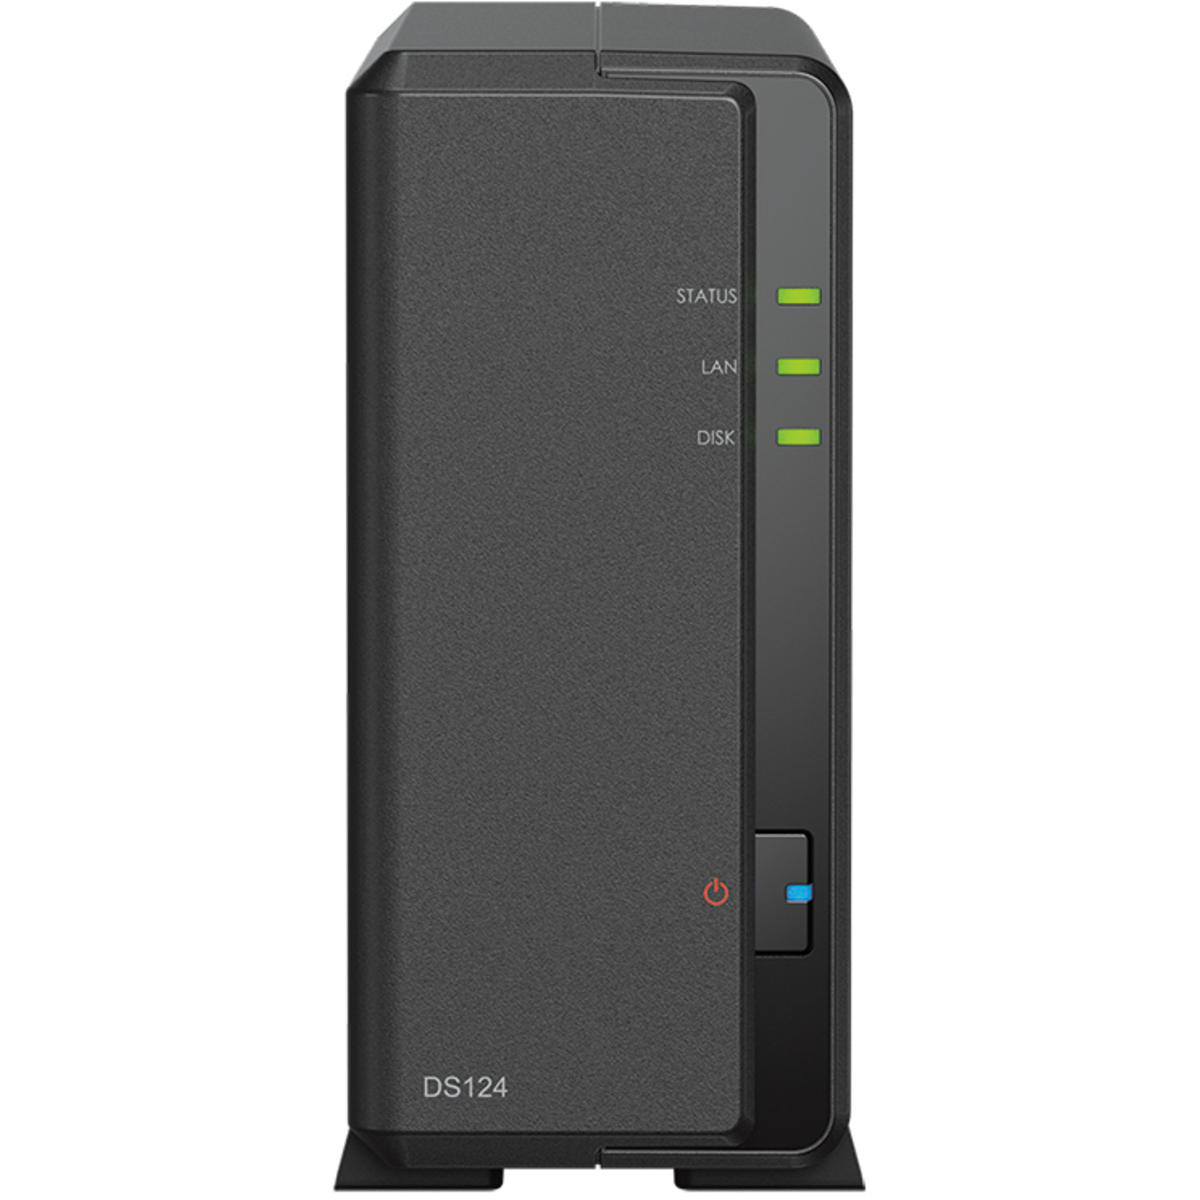 Synology DiskStation DS124 12tb 1-Bay Desktop Personal / Basic Home / Small Office NAS - Network Attached Storage Device 1x12tb Seagate EXOS X18 ST12000NM000J 3.5 7200rpm SATA 6Gb/s HDD ENTERPRISE Class Drives Installed - Burn-In Tested DiskStation DS124